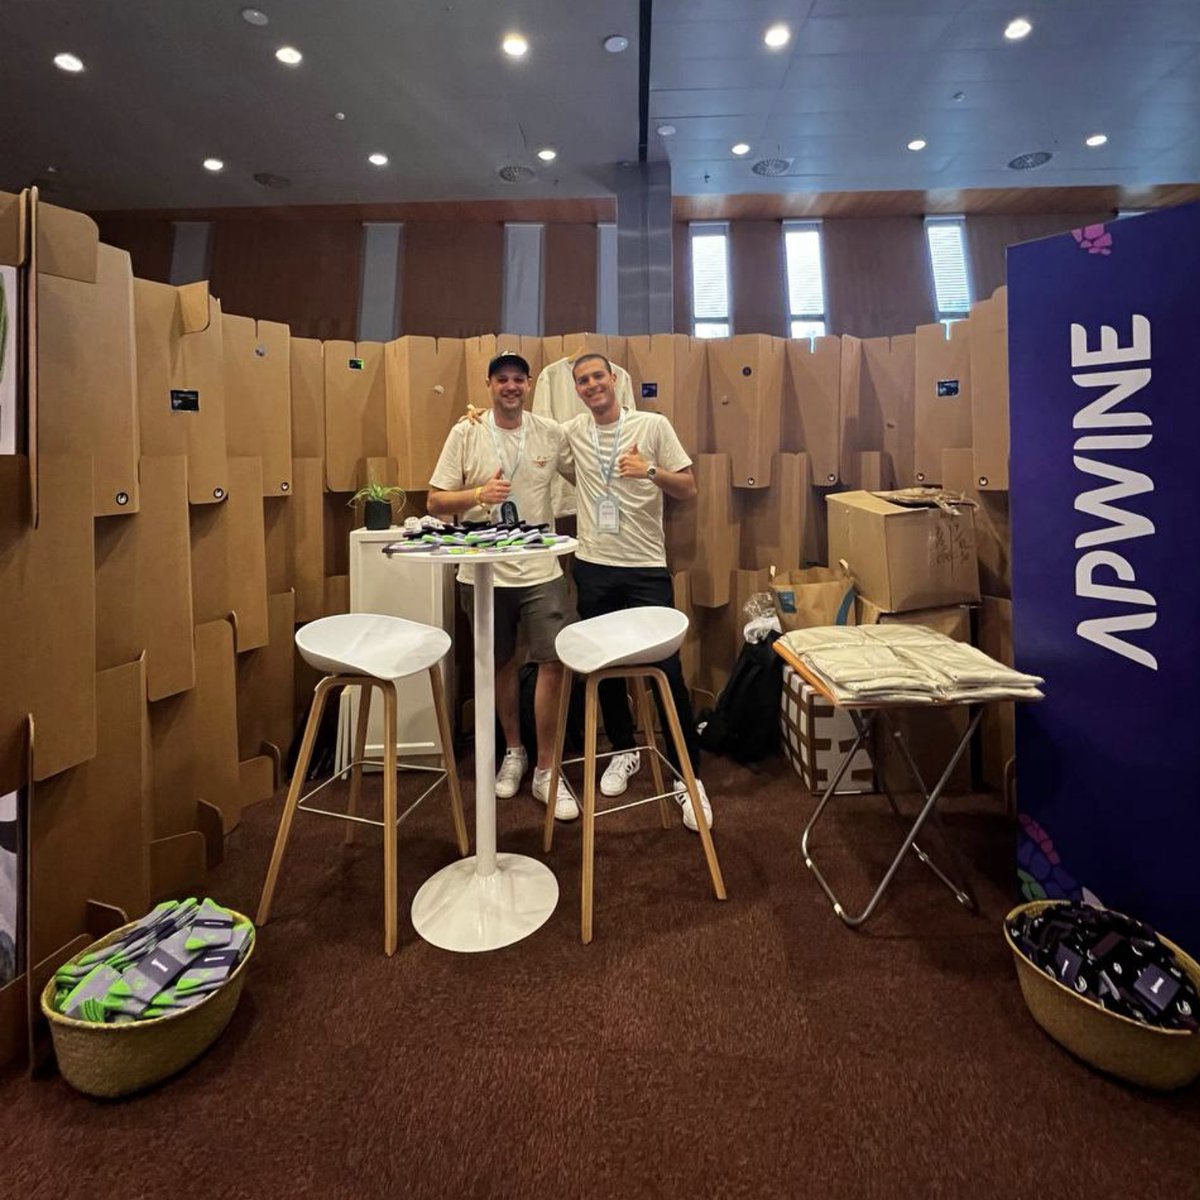 ¿Qué tal @eth_barcelona? 🇪🇸

APWine is here with @Sam48152259 & @berkani4_yanis at the booth with dope swag 🧦🍷

Tomorrow, @Ulydev is giving a talk about Yield Futurization  🪄

Come say hi! 👋